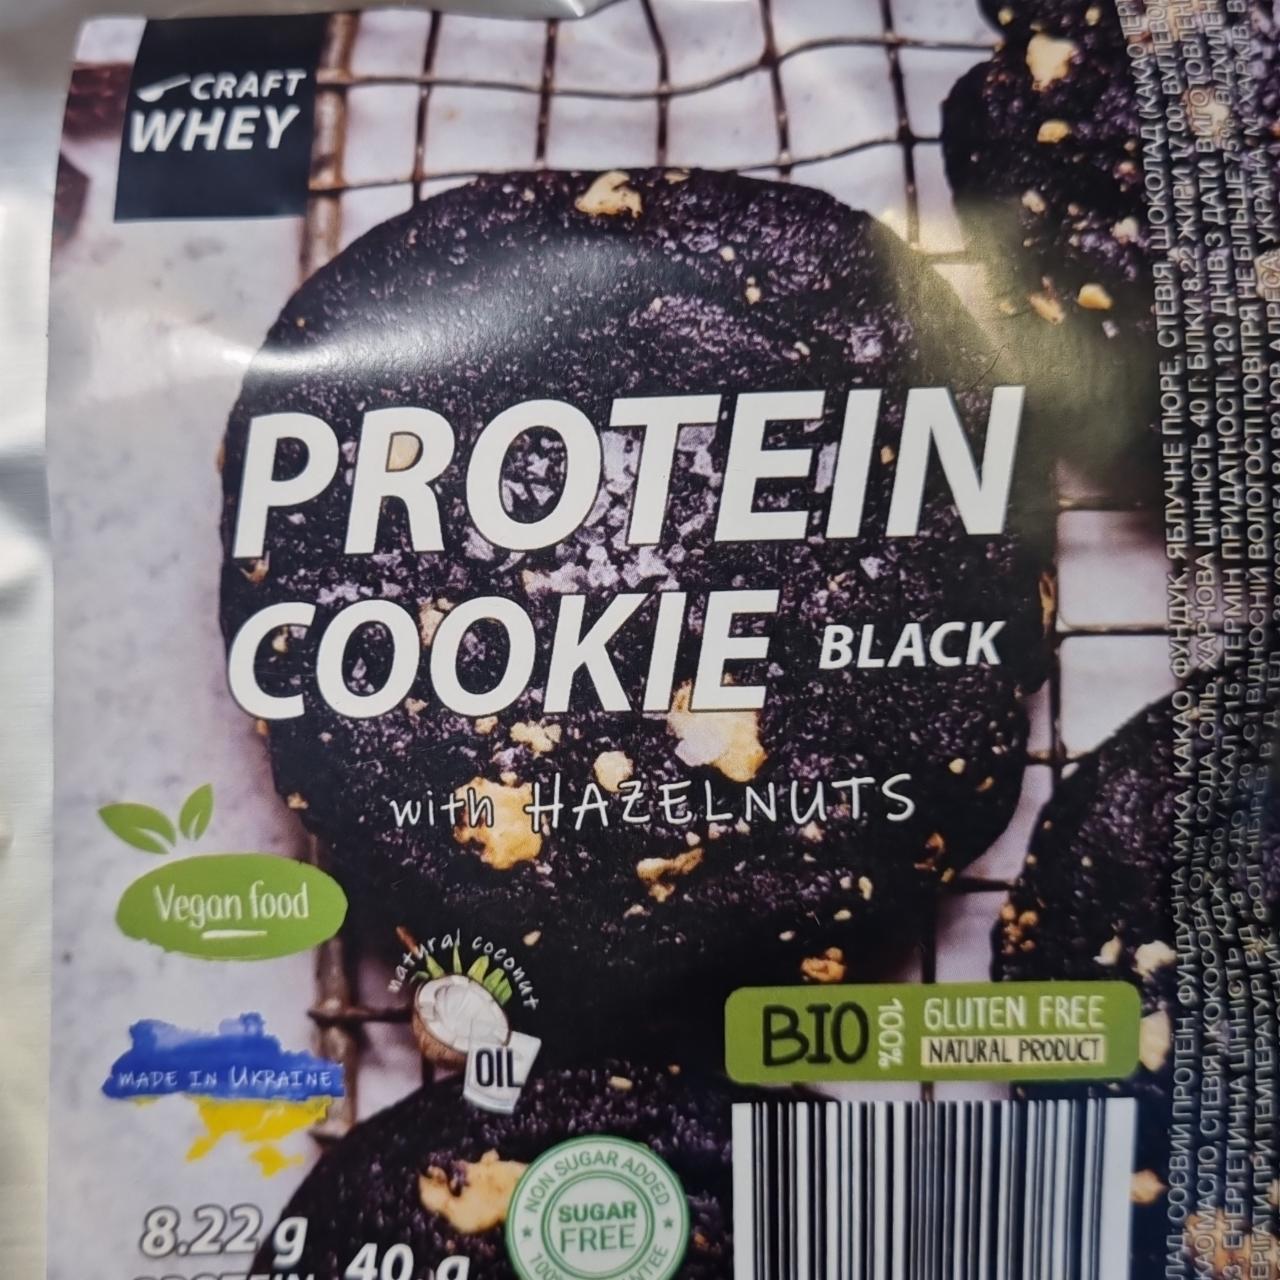 Фото - Protein cookie Black with hazelnuts Craft whey